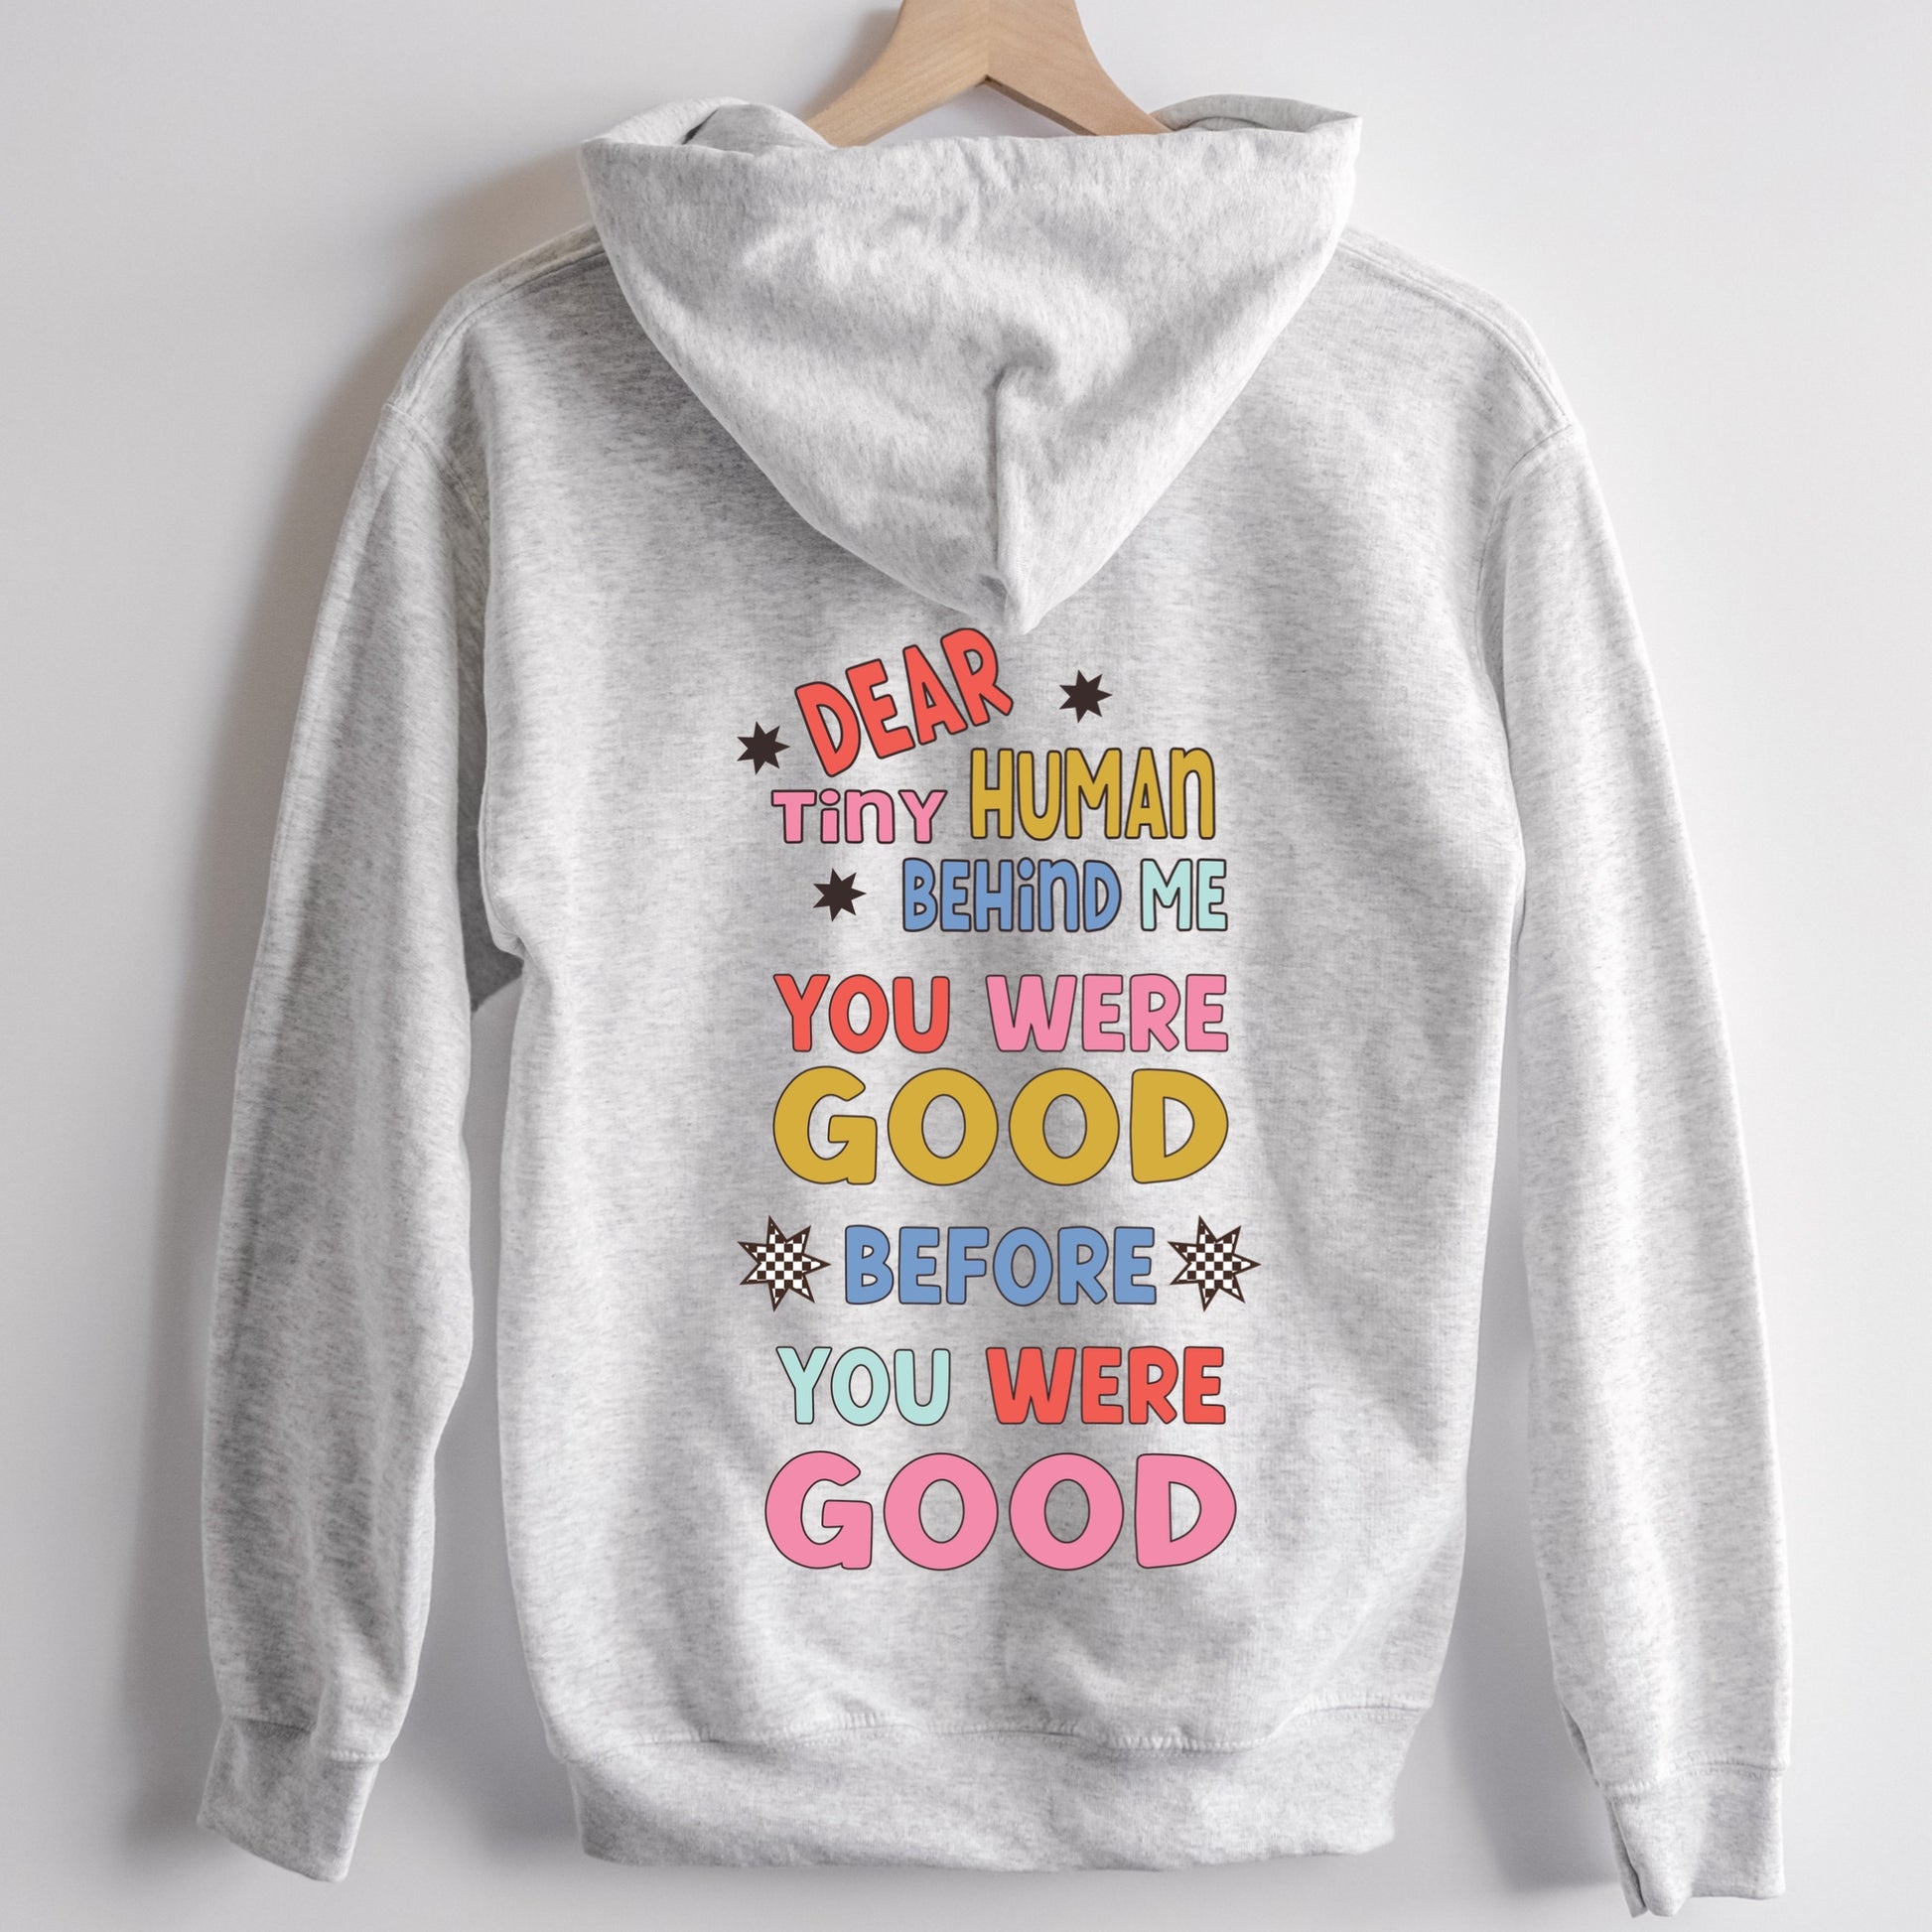 "Dear Tiny Human Behind Me, You Were Good Before You Were Good" Multi-colored back to school iron on heat transfer.